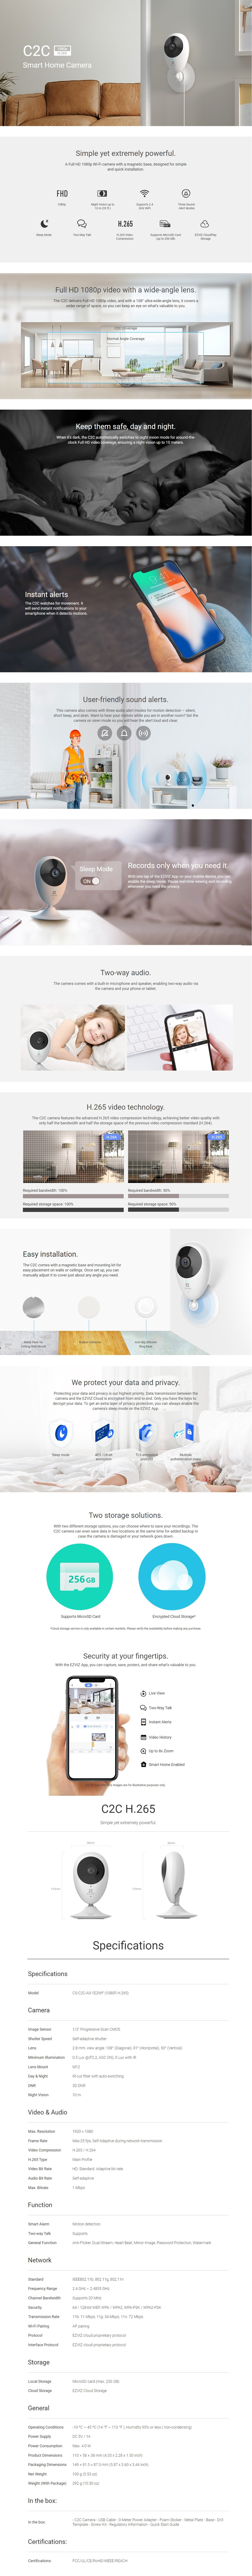 A large marketing image providing additional information about the product EZVIZ C2C Smart Home Camera - Additional alt info not provided